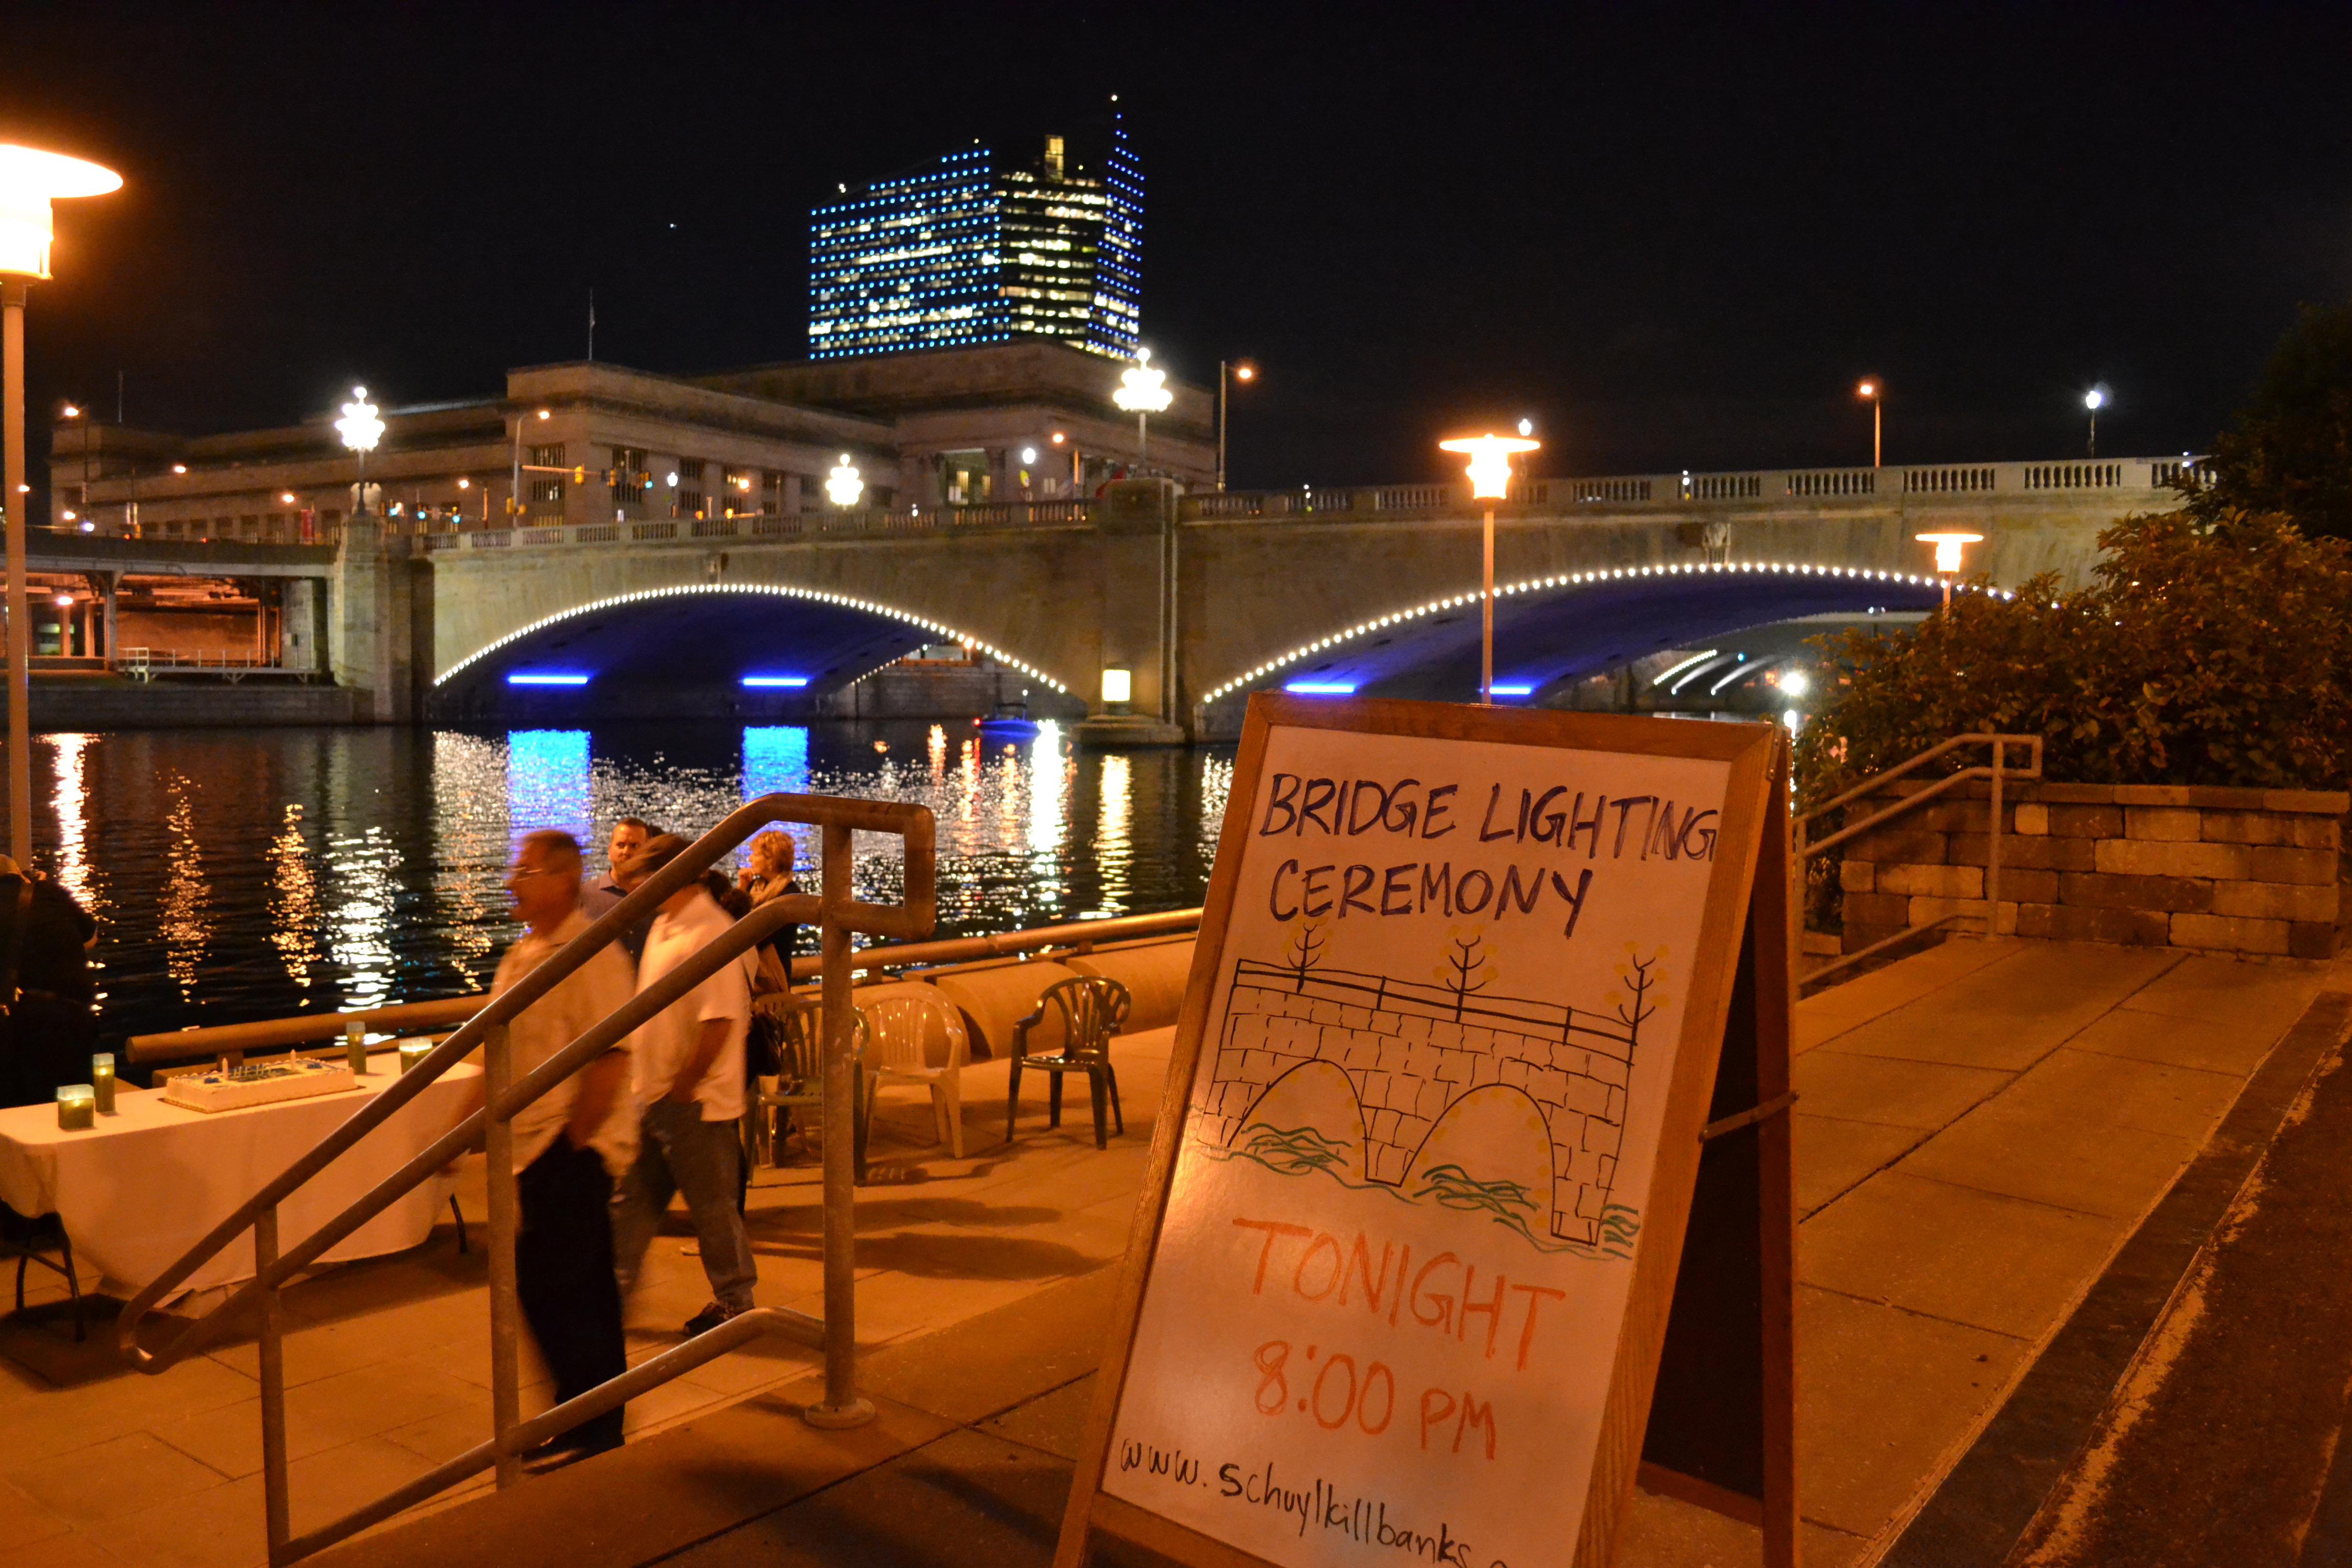 In addition to the bridge lighting, festivities included dessert and a stroll along the trail